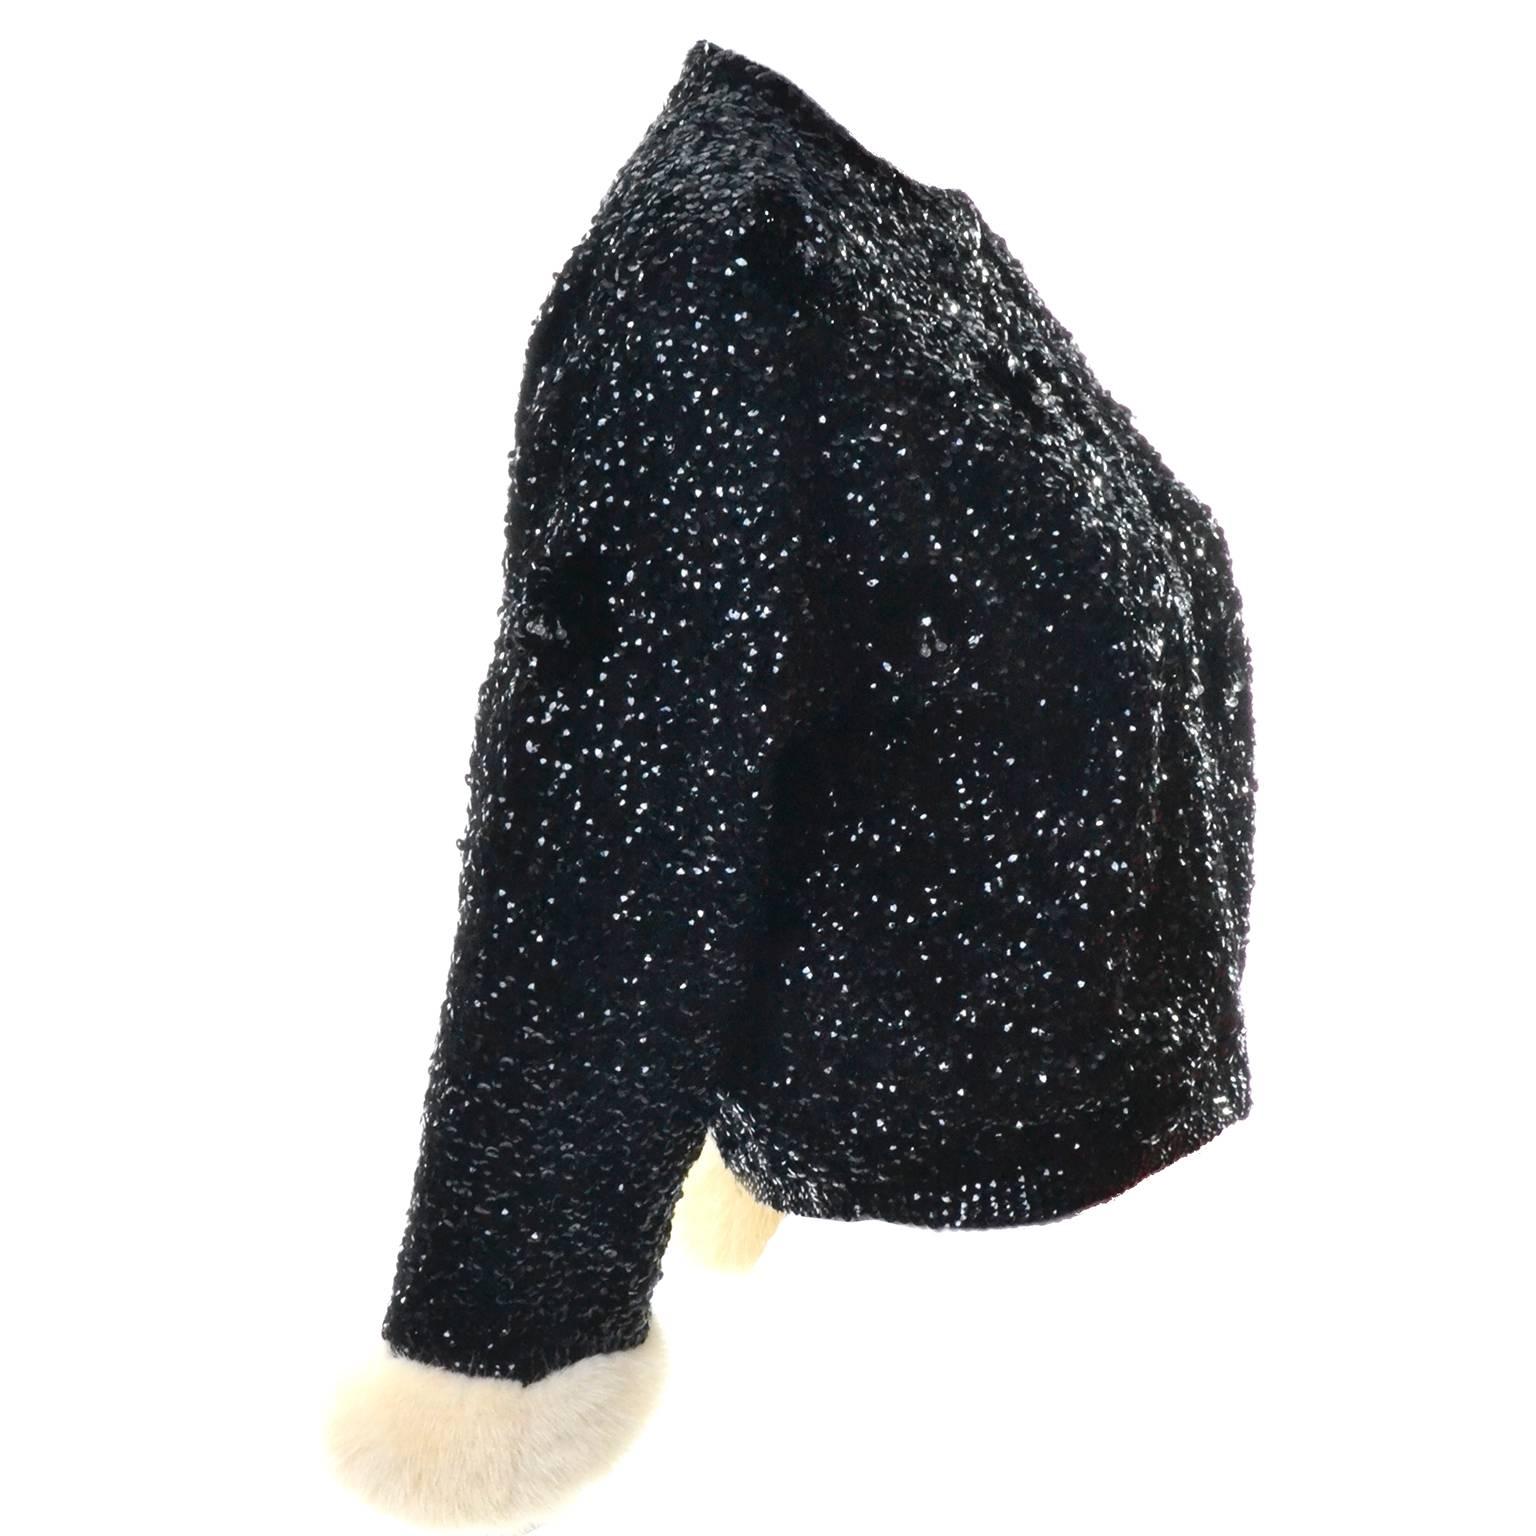 This is an absolutely exquisite little black cashmere or wool/cashmere blend jacket that has incredible white mink cuffs and is covered in black sequins. These beaded and sequin sweaters or jackets were common in the 1960's but this one is special